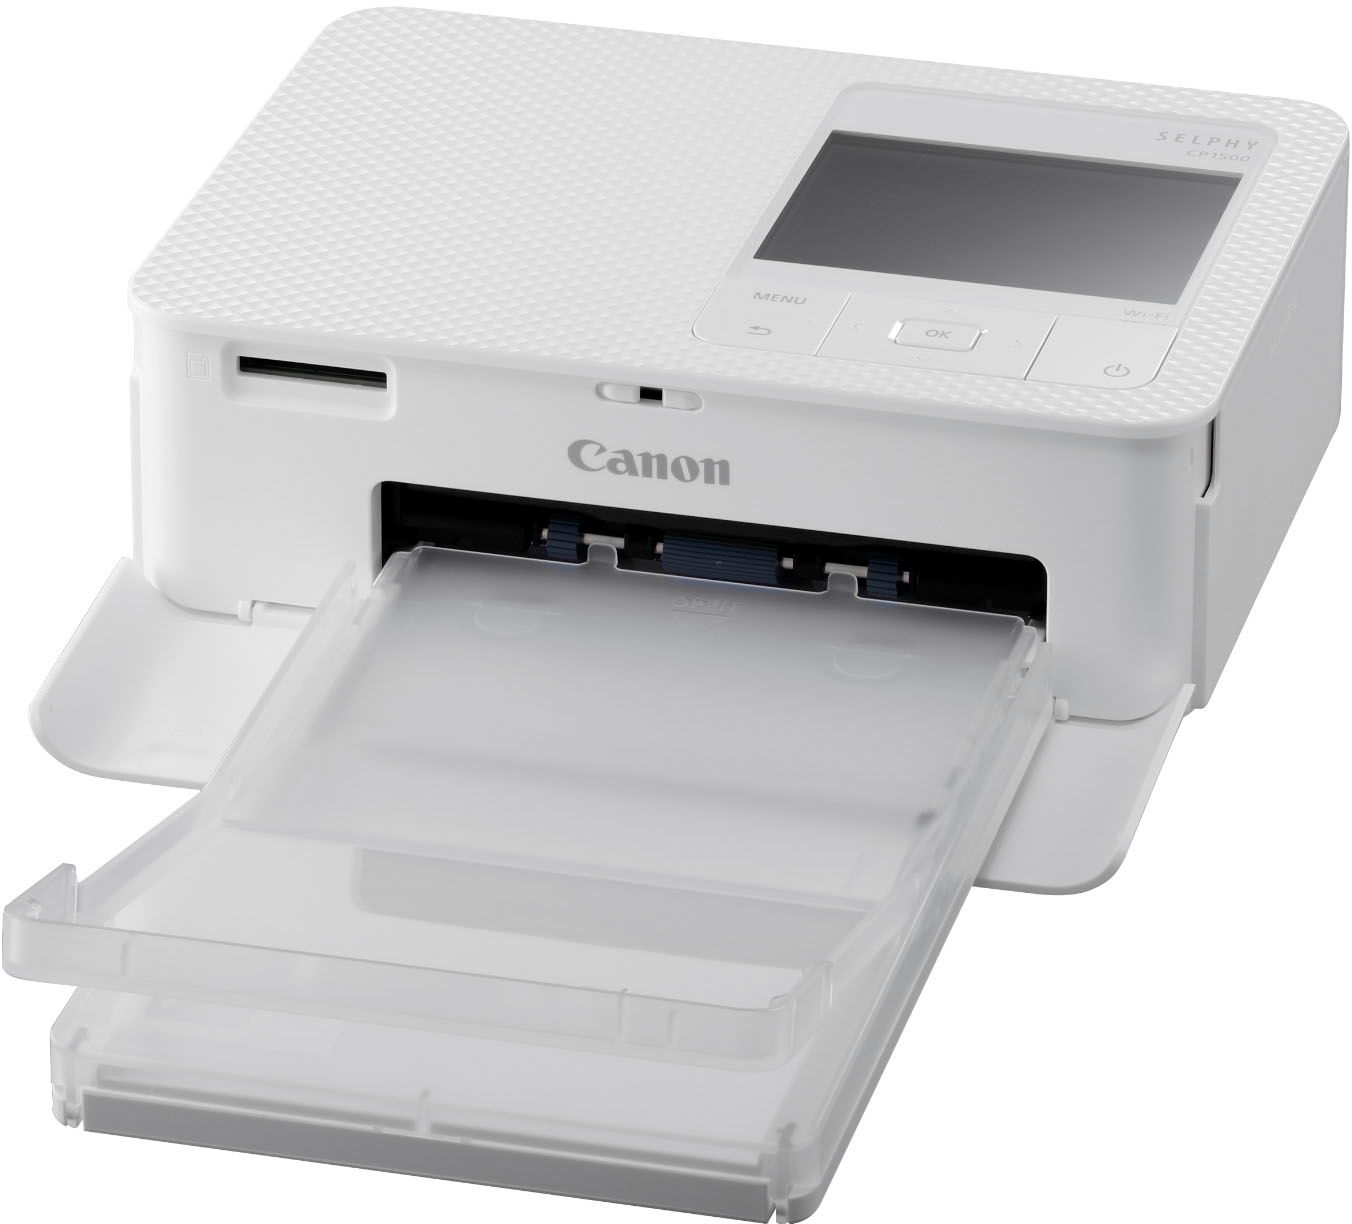 Angle View: Canon - SELPHY CP1500 Wireless Compact Photo Printer - White